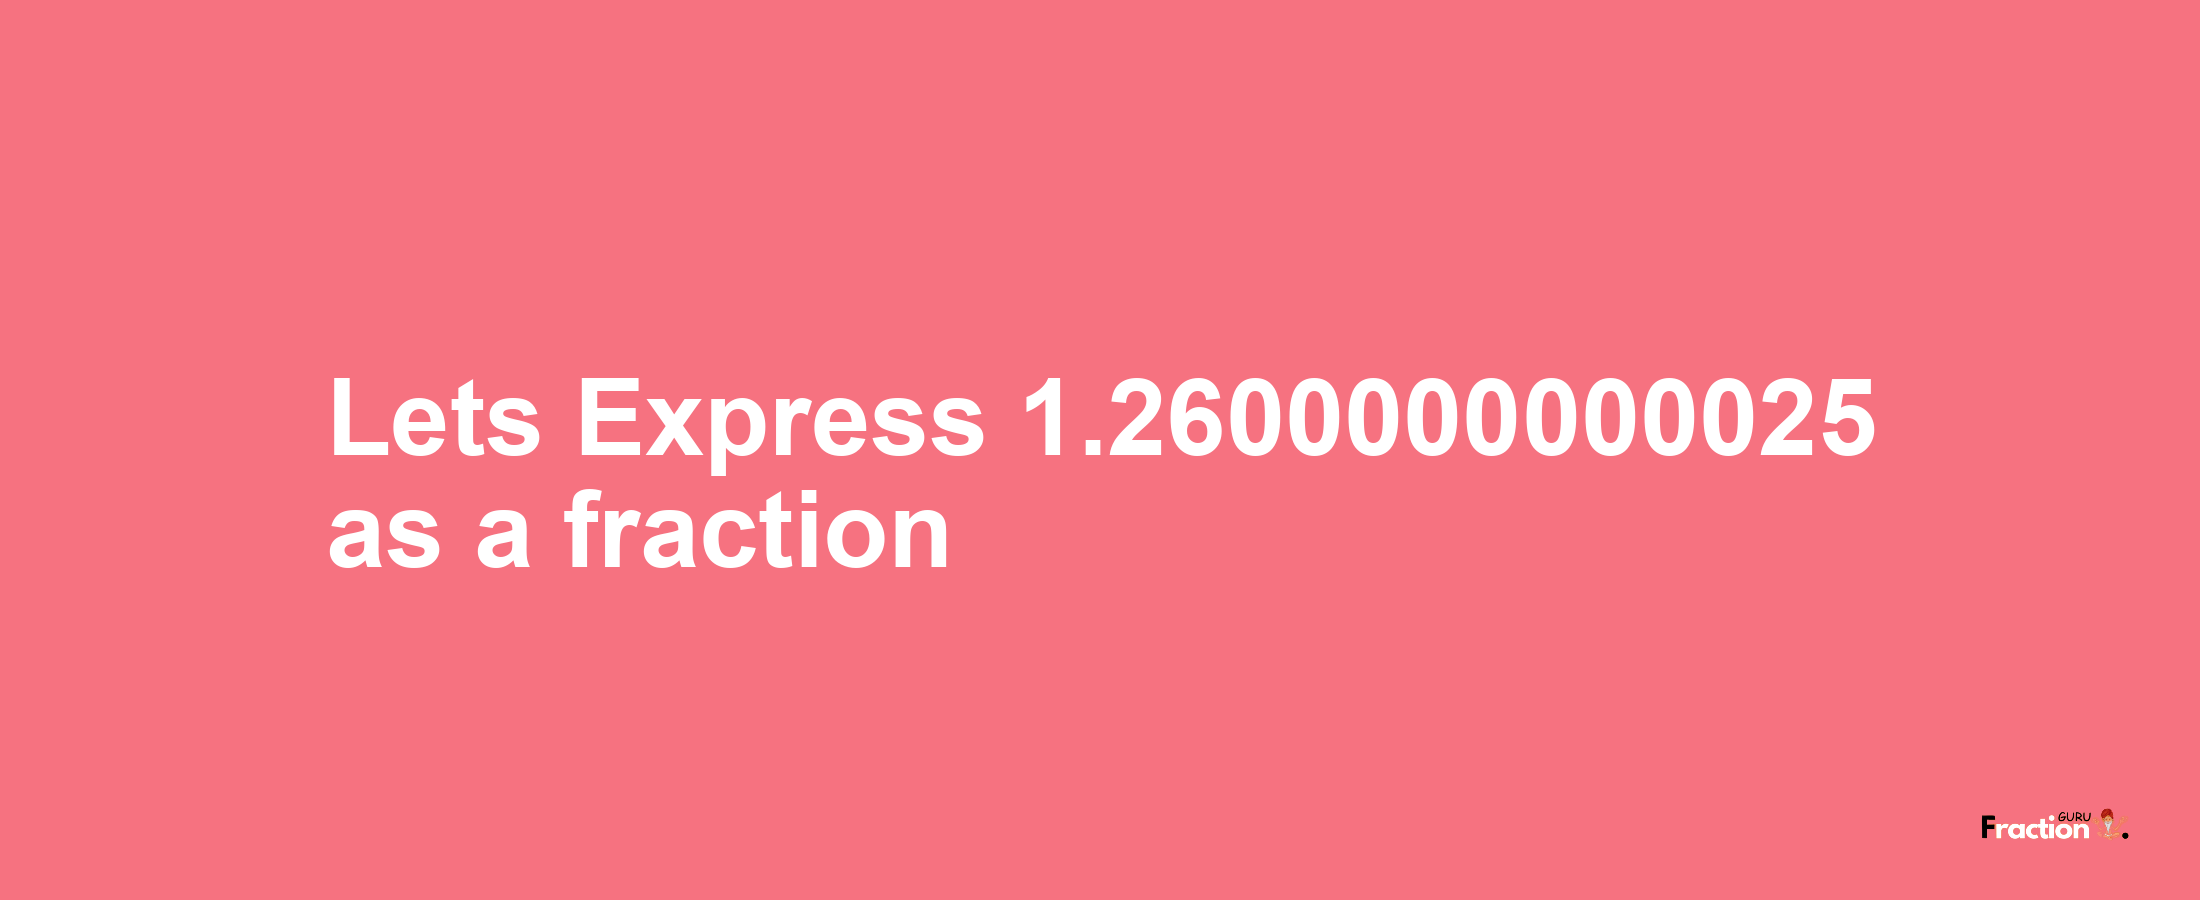 Lets Express 1.2600000000025 as afraction